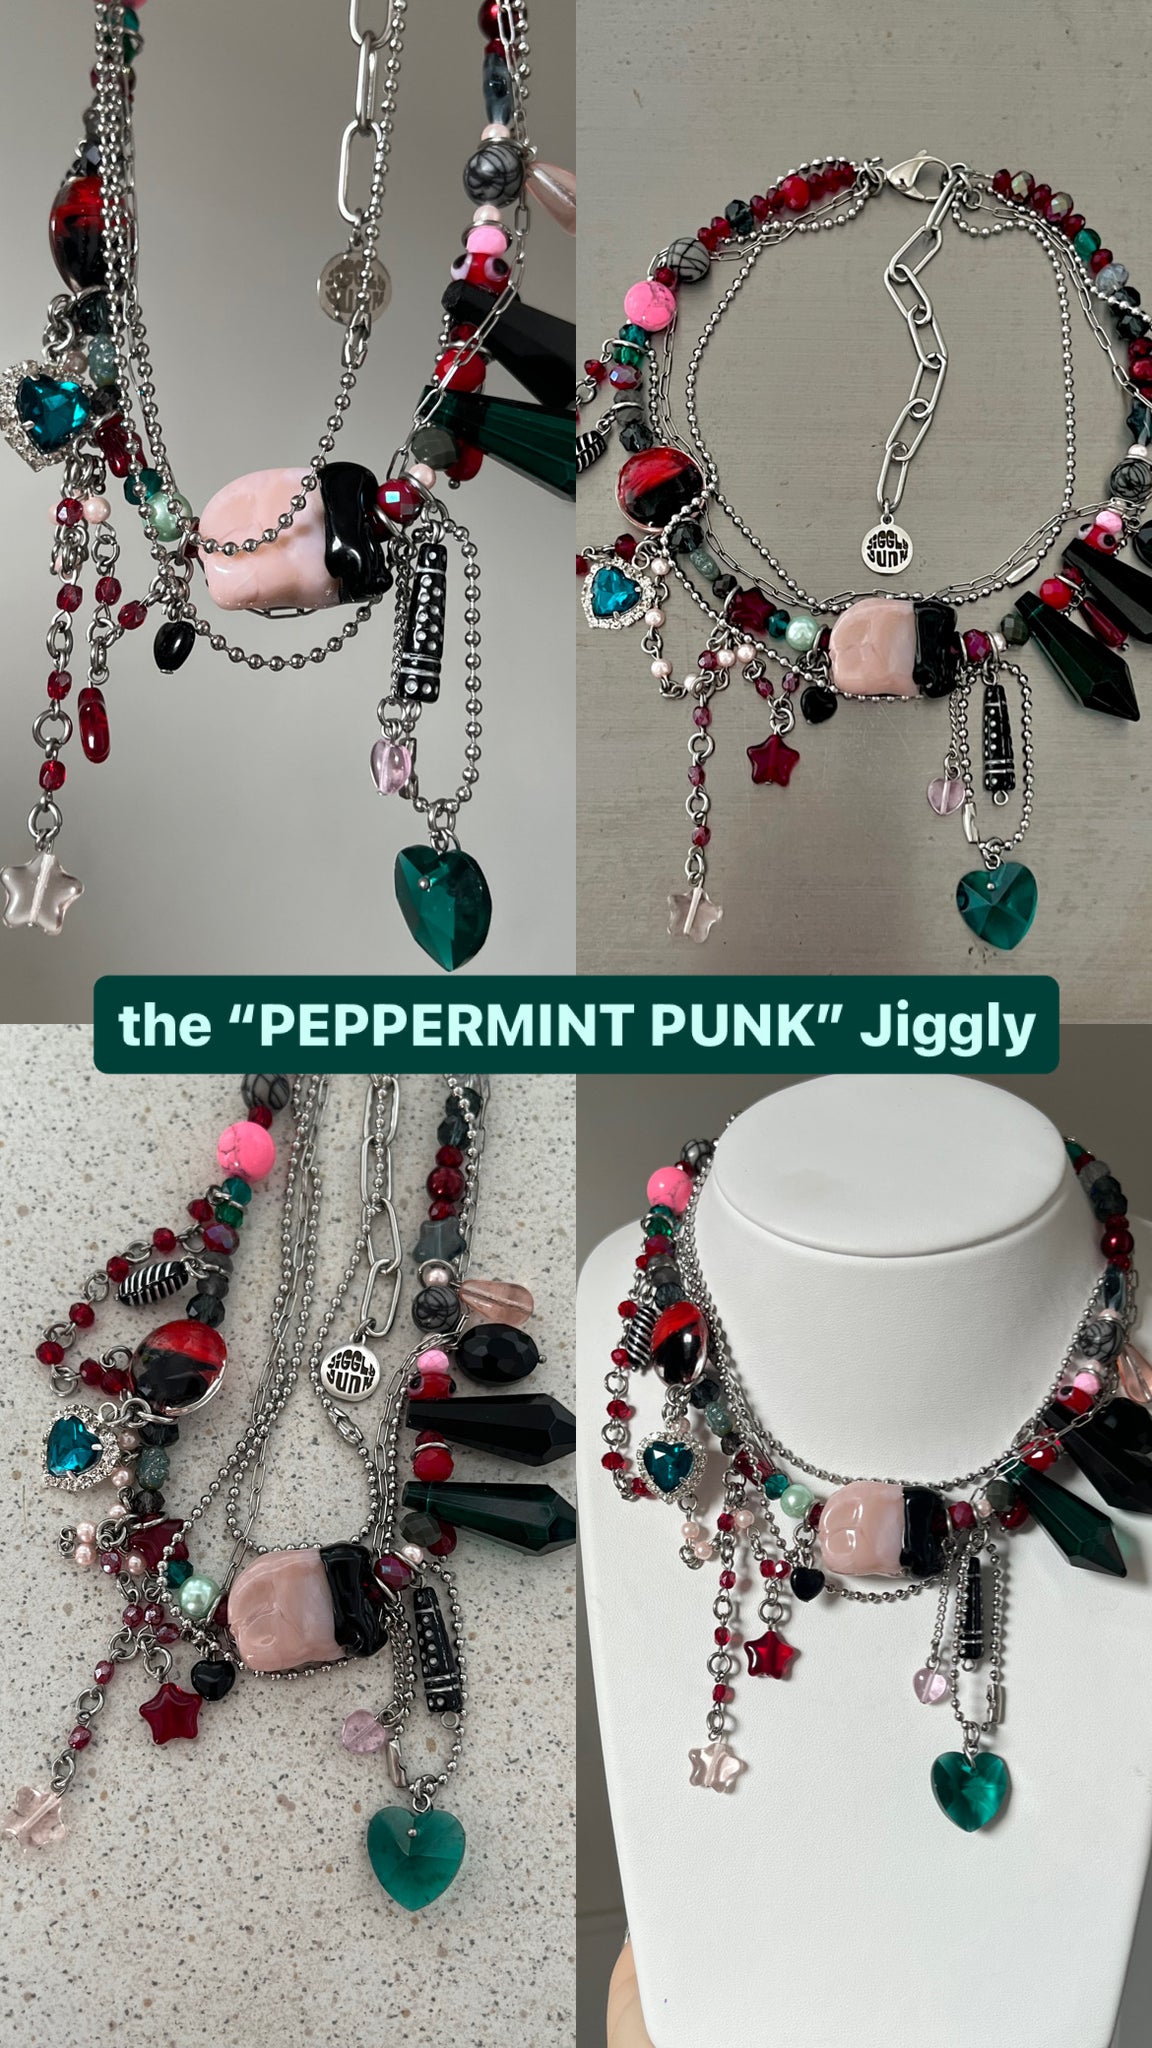 The “PEPPERMINT PUNK” Jiggly